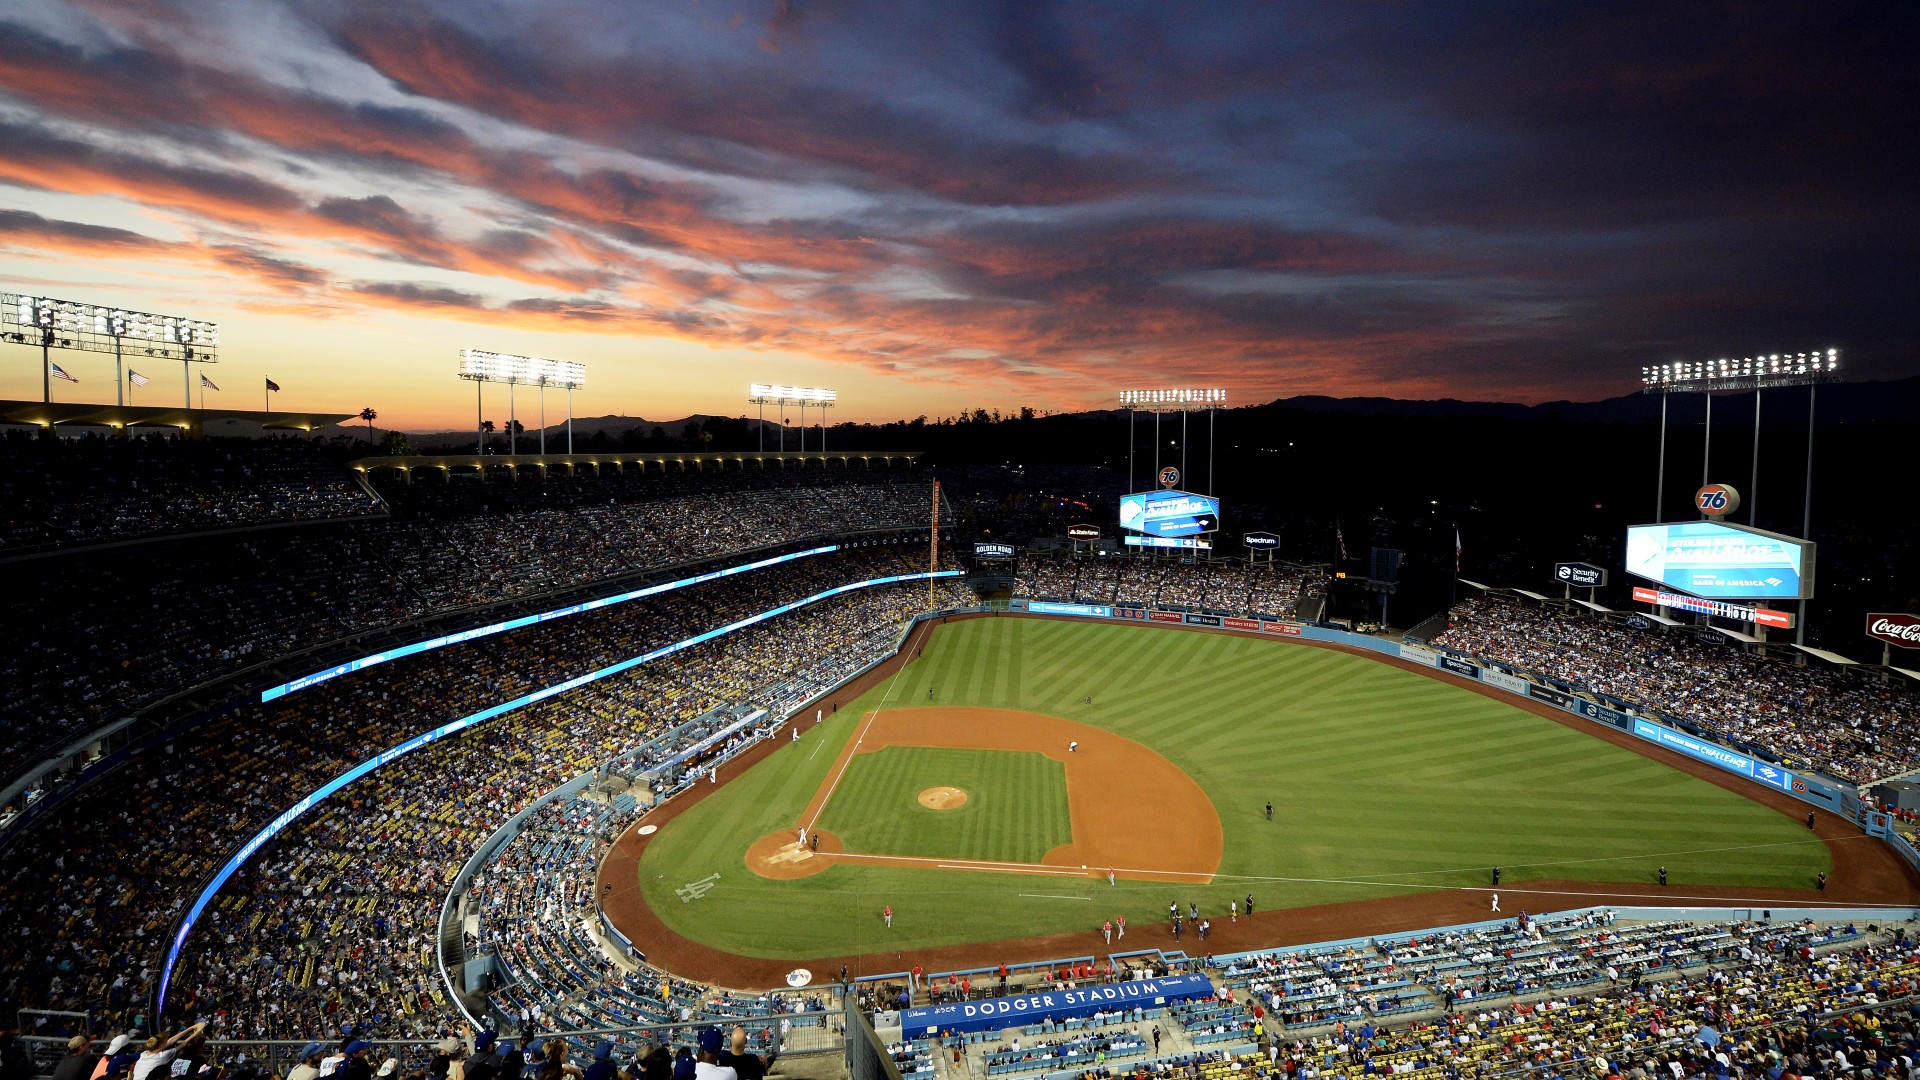 Dodgers Face Reds in Home Opener at Dodger Stadium Tonight